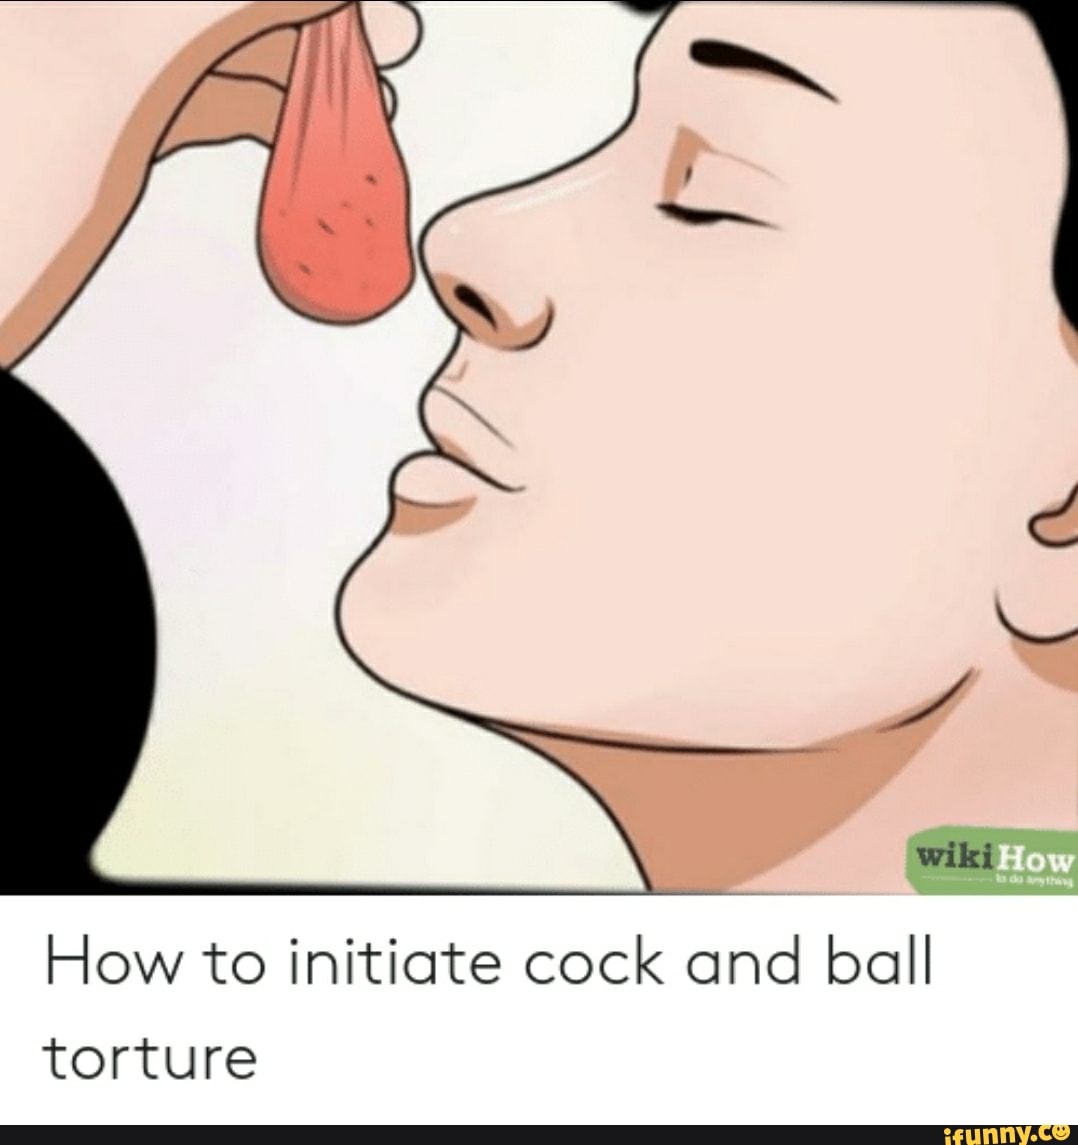 How To Initiate Cock And Ball Torture